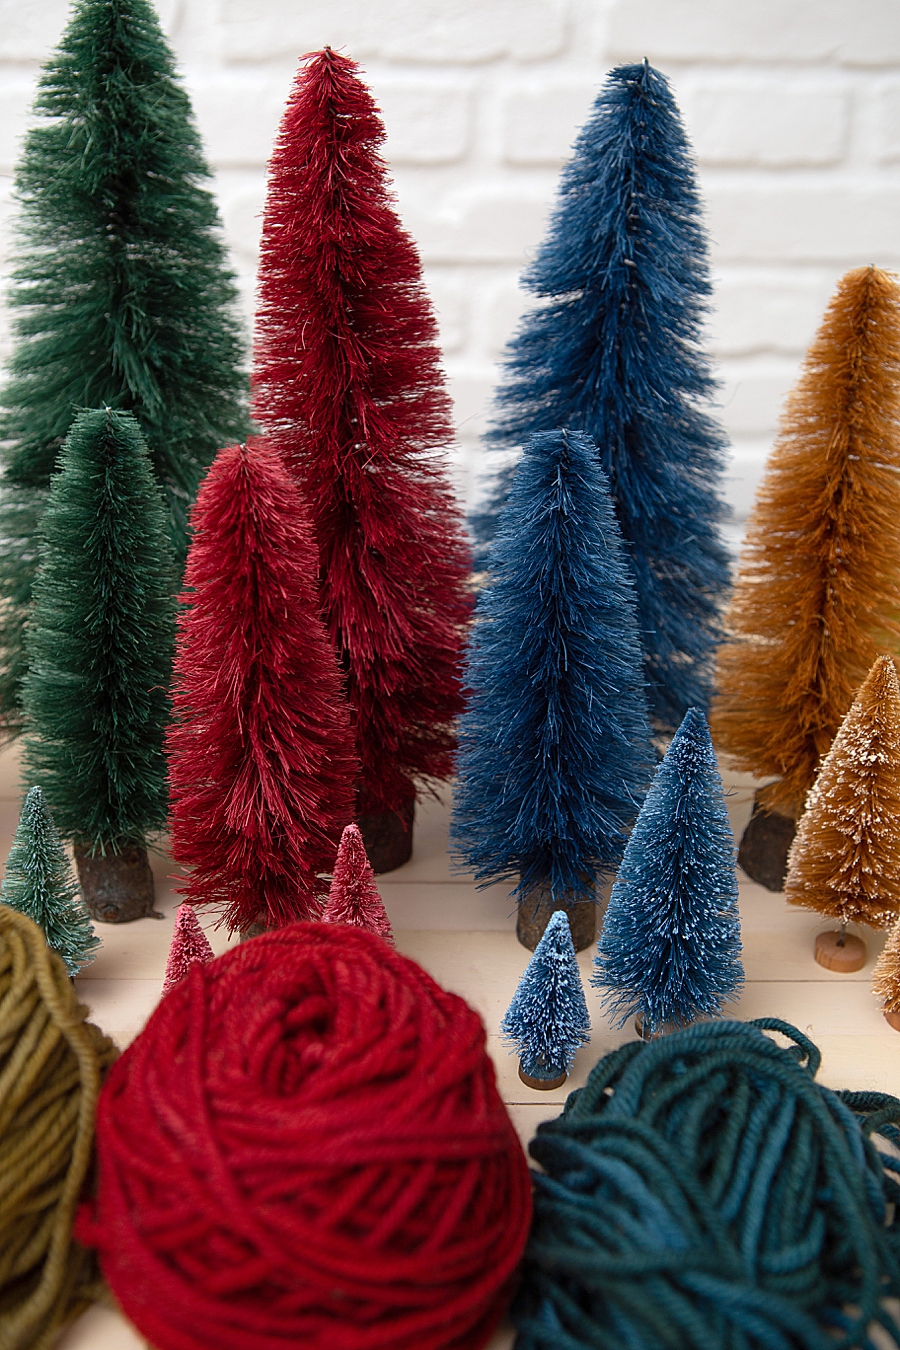 I dyed bottle brush trees to match this special yarn!